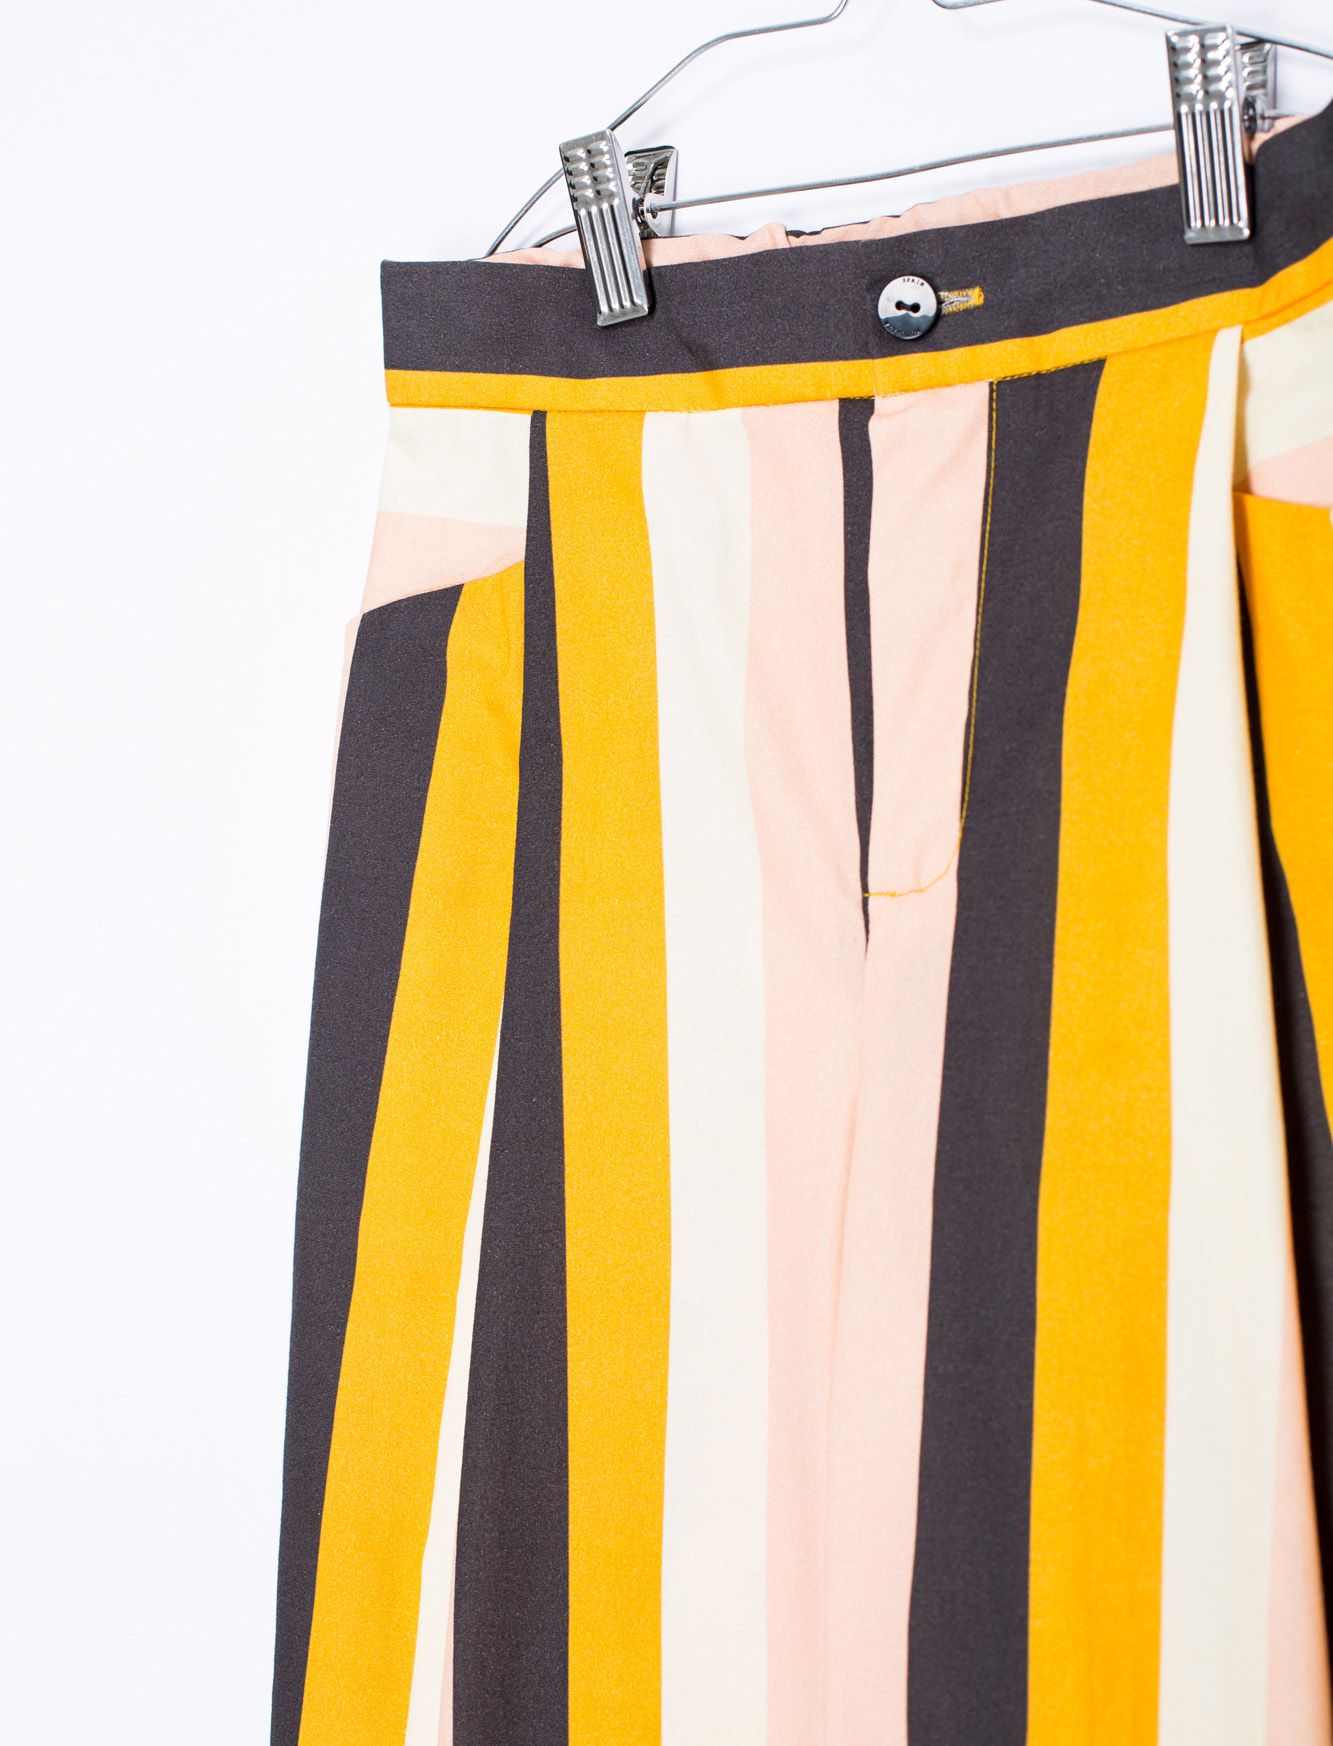                                                                                                                       Relaxed Pants  - Multicolour stripes